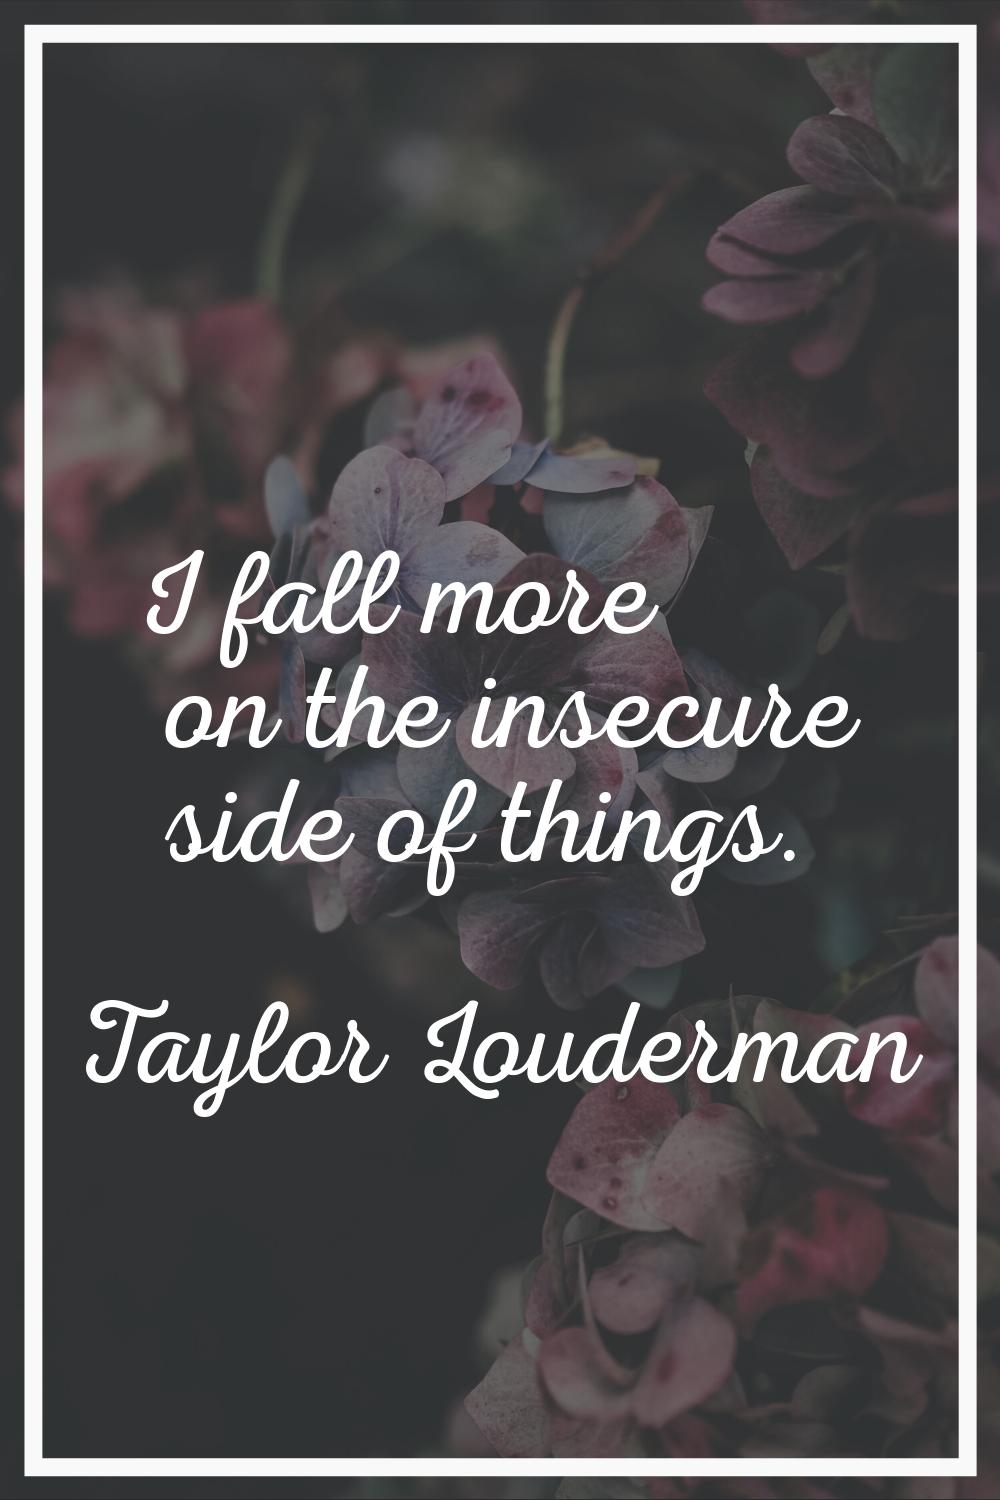 I fall more on the insecure side of things.